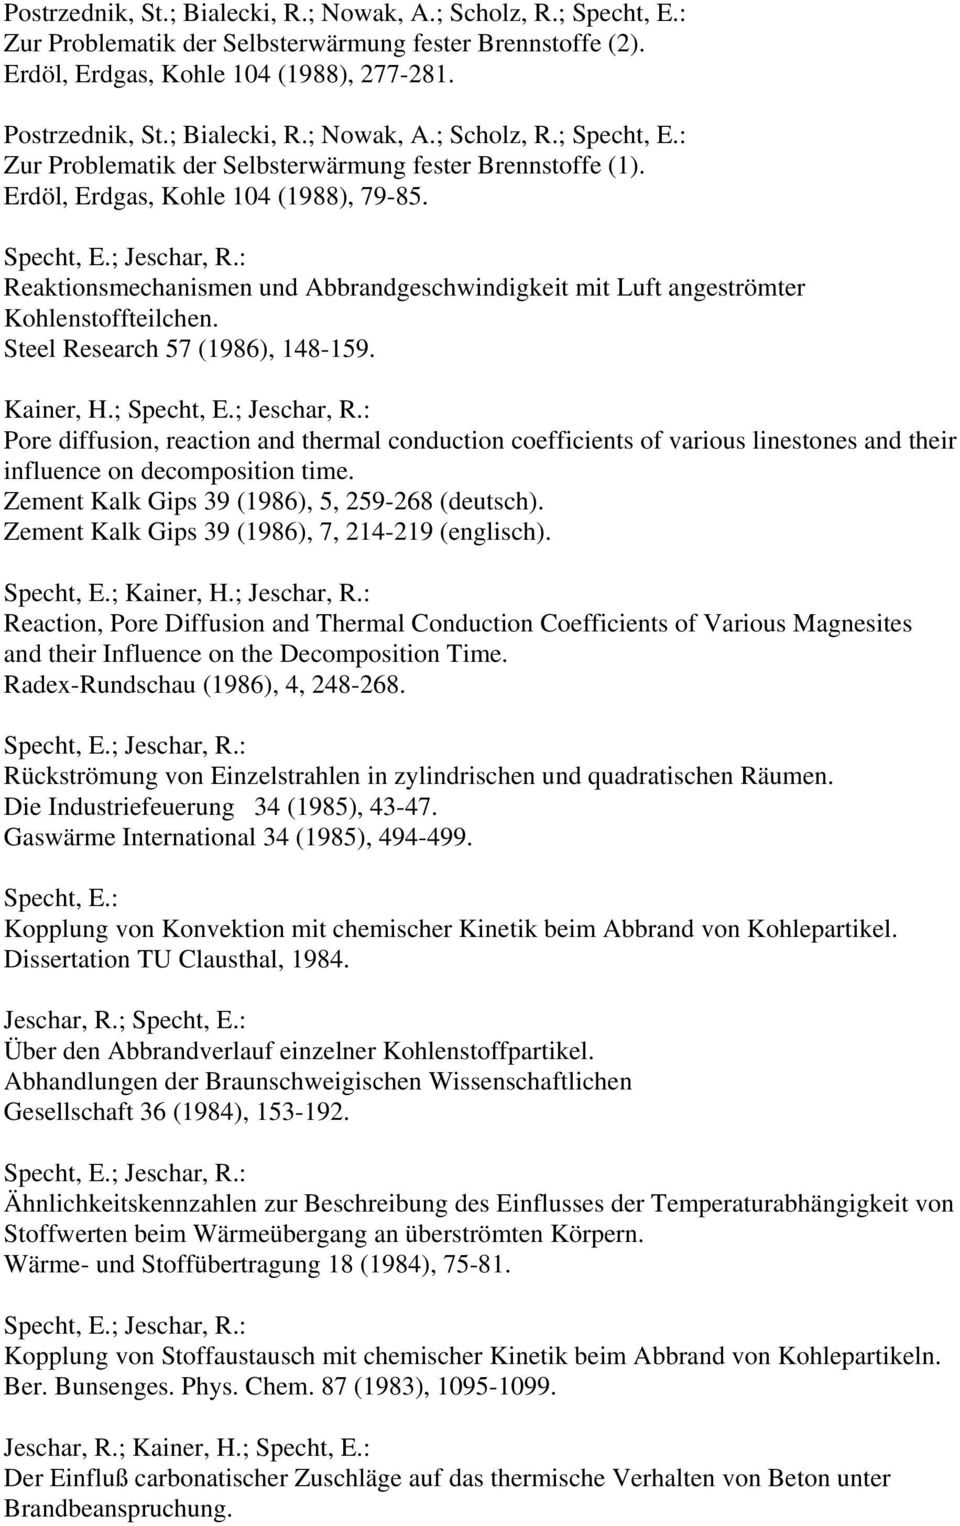 ; Pore diffusion, reaction and thermal conduction coefficients of various linestones and their influence on decomposition time. Zement Kalk Gips 39 (1986), 5, 259-268 (deutsch).